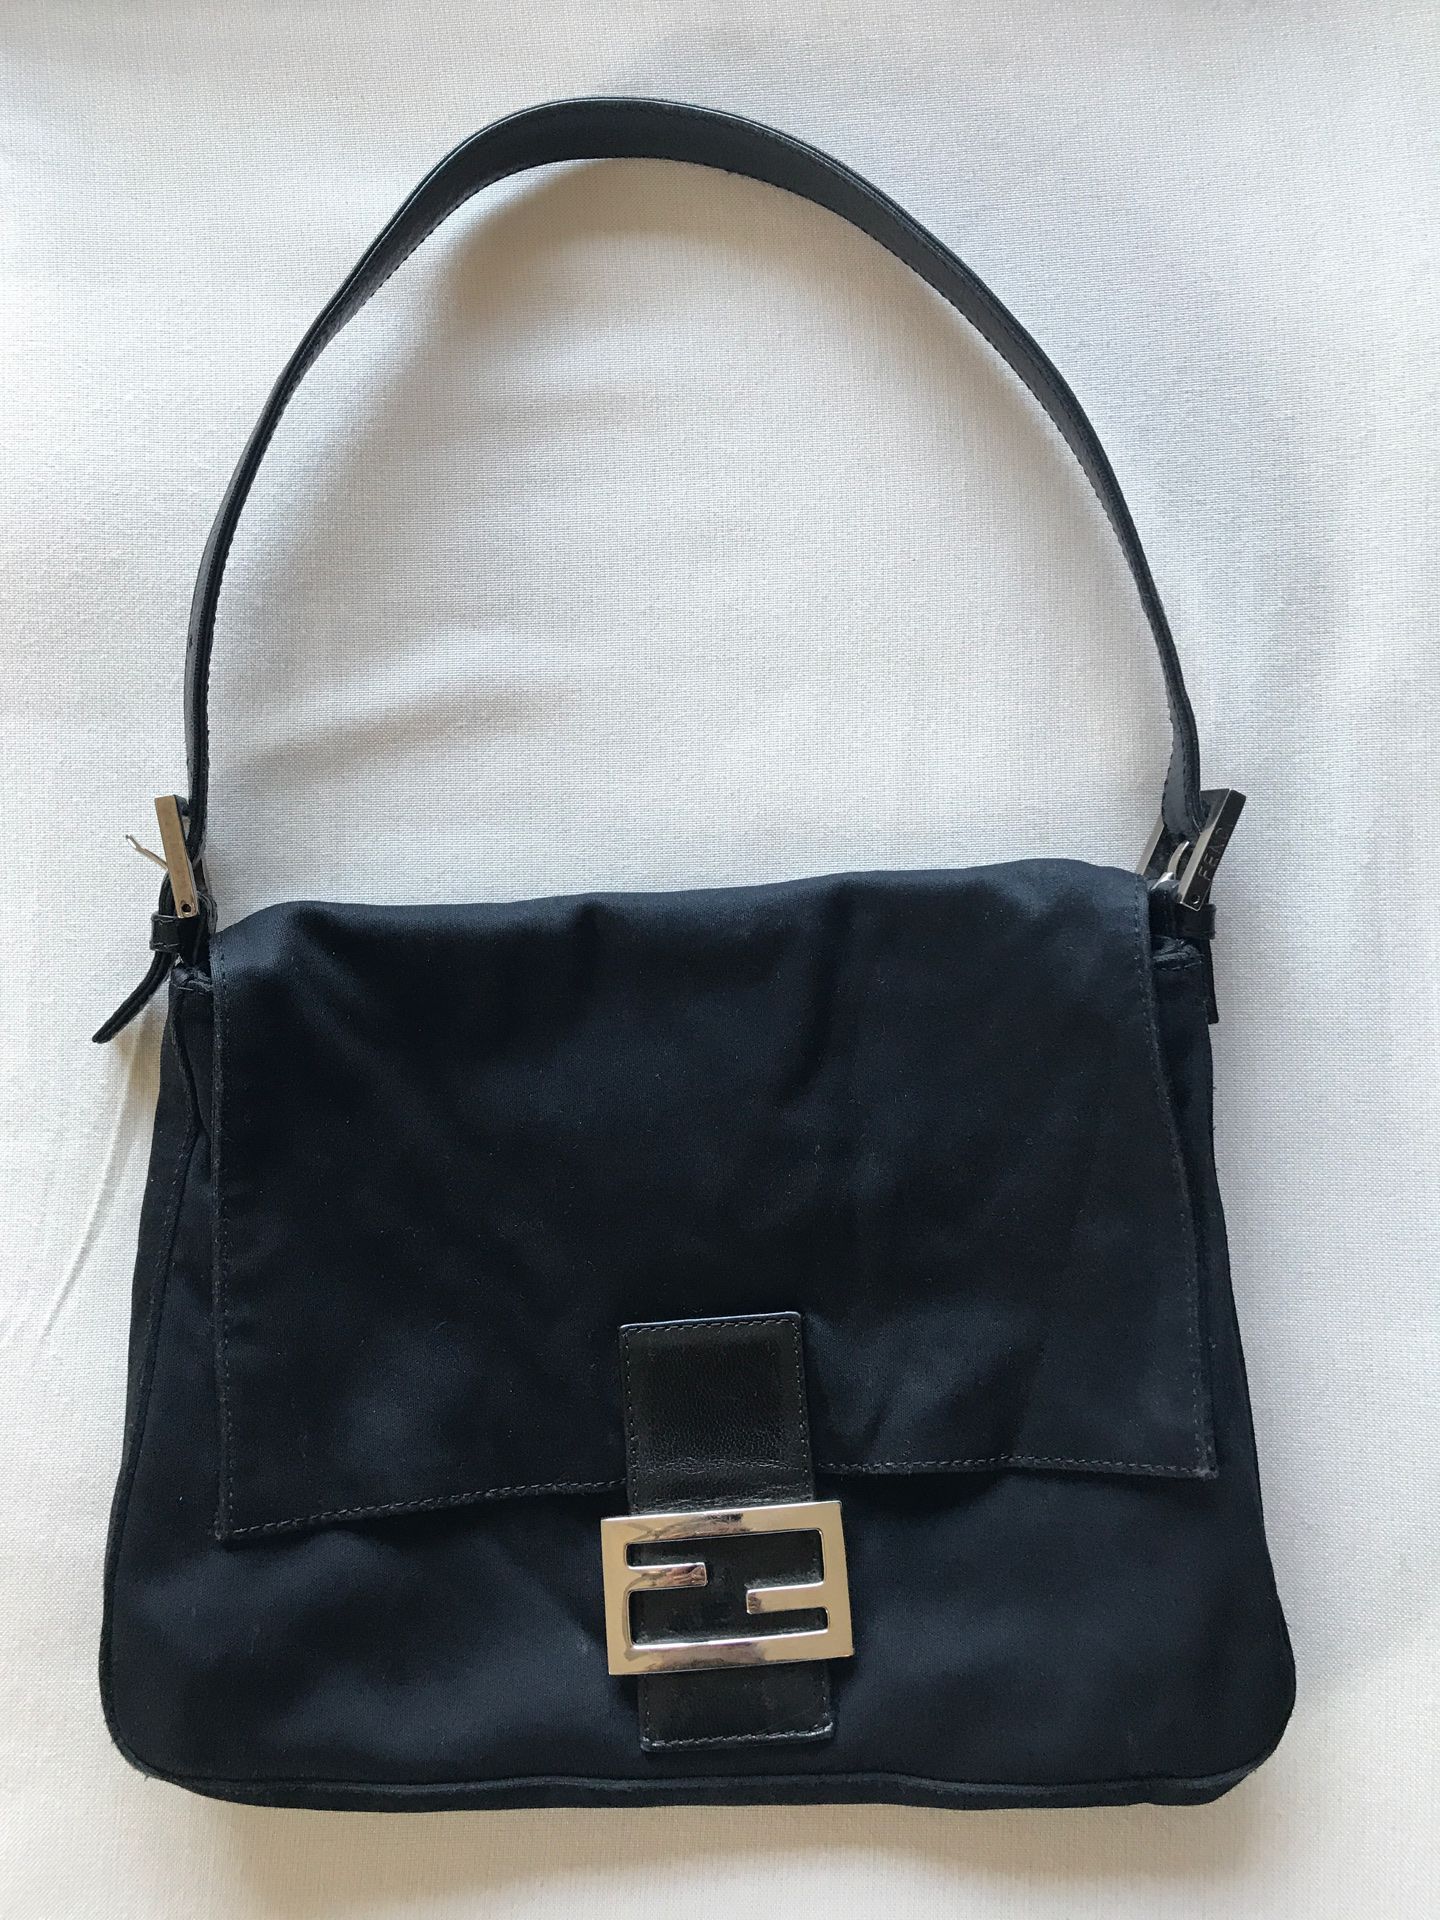 Fendi made in Italy authentic hand bag